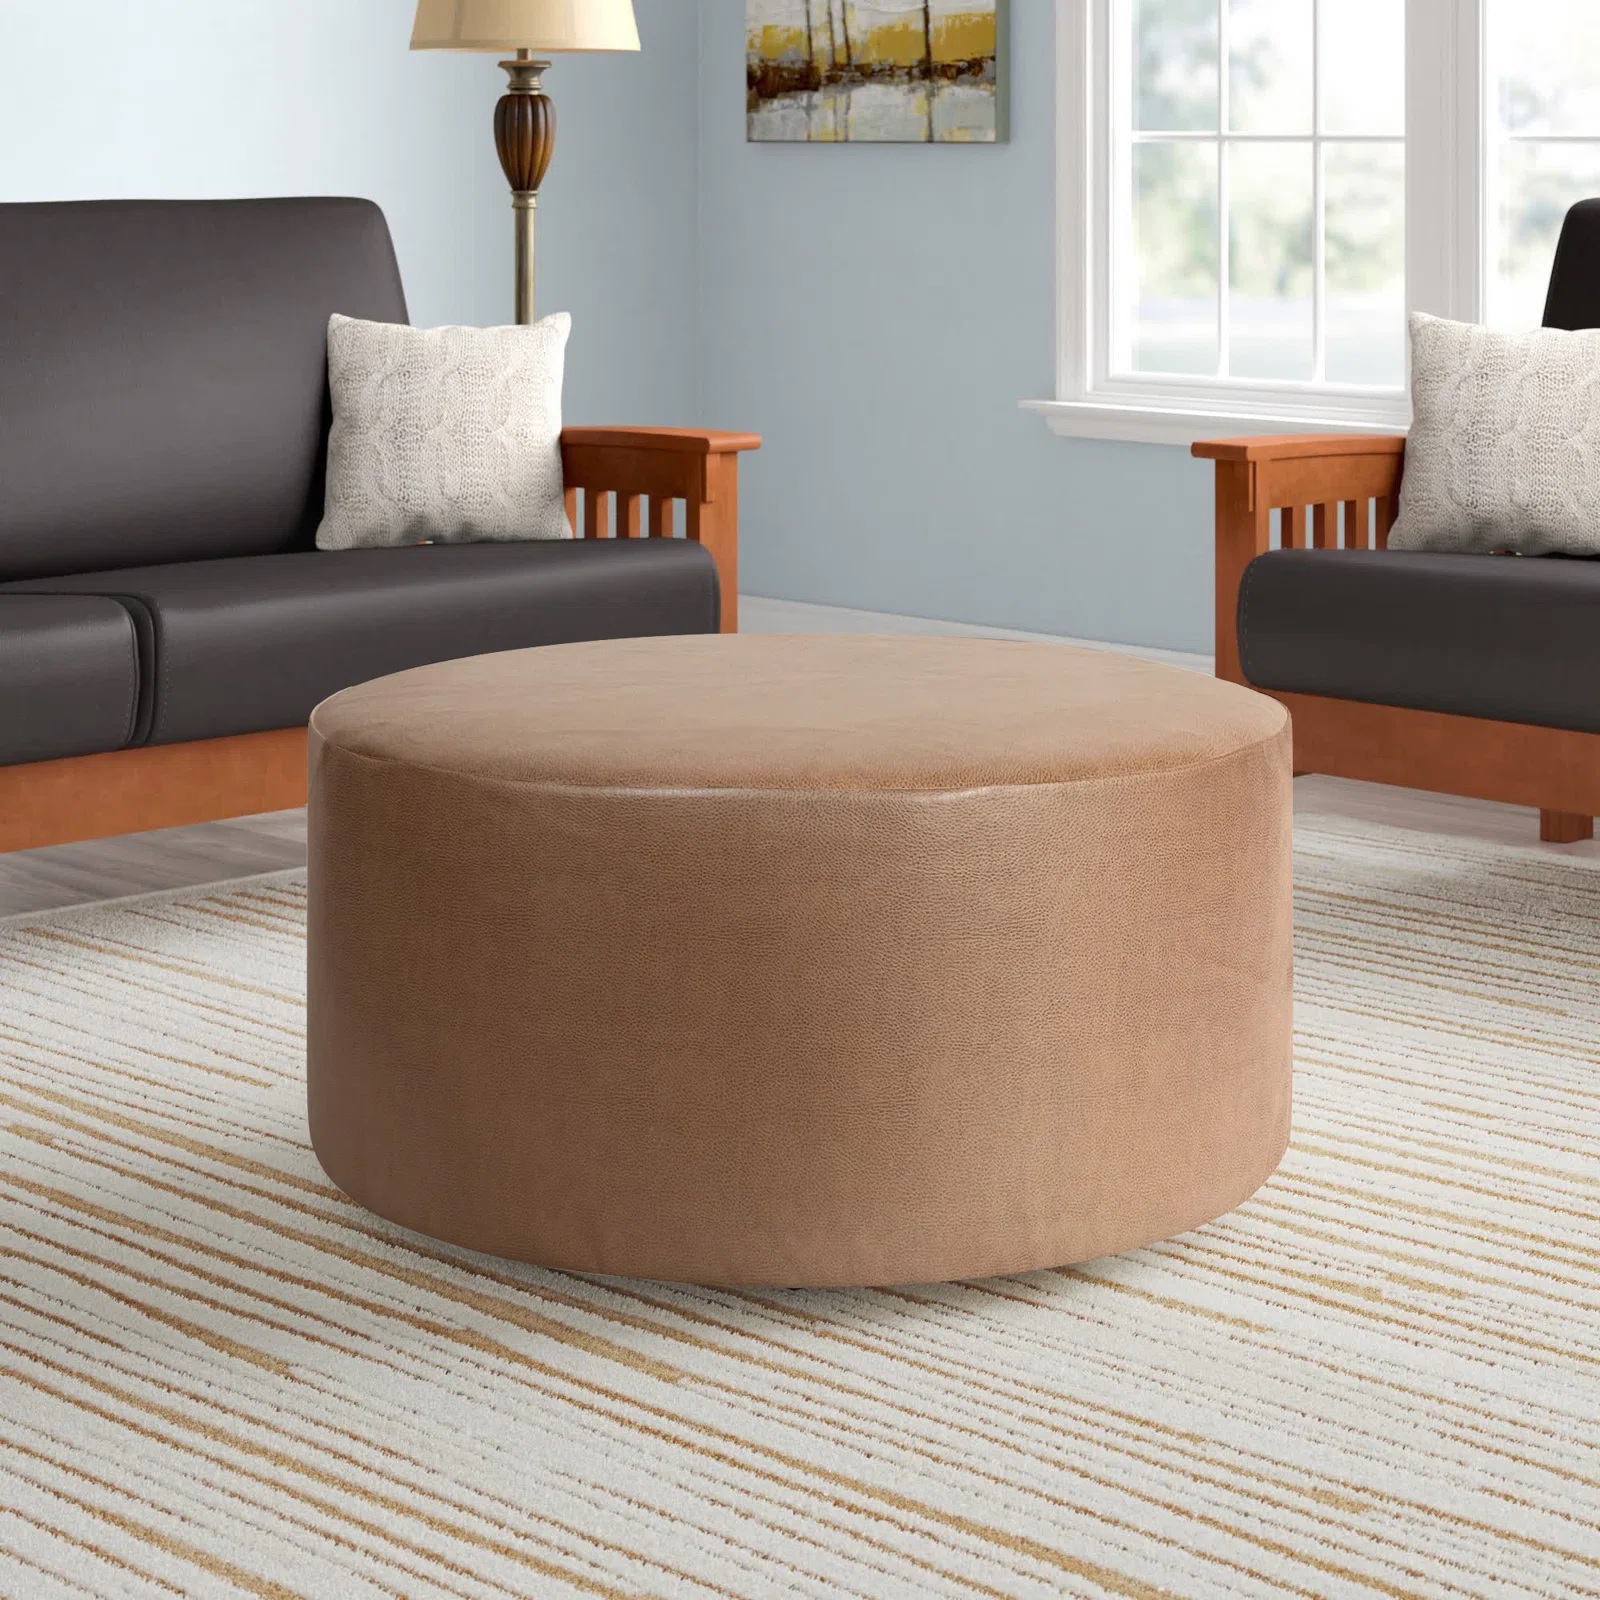 minimalist leather tan ottoman round shape simple lines straightforward rounded cocktail ottoman for living room sofa design multiple color options available footrest